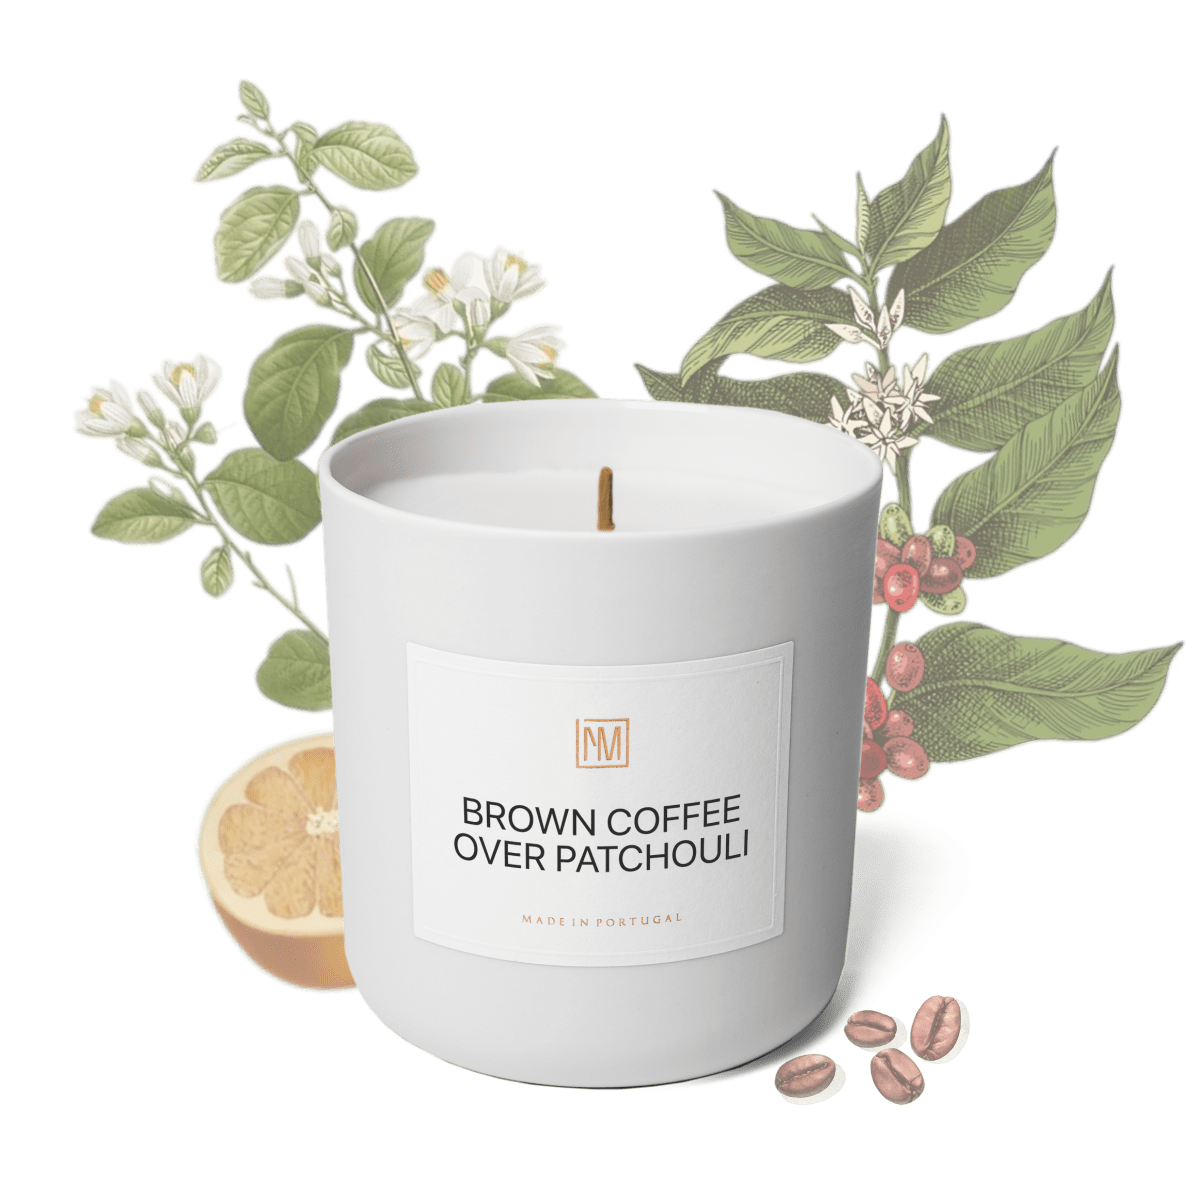 Brown Coffee over Patchouli Scented Candle